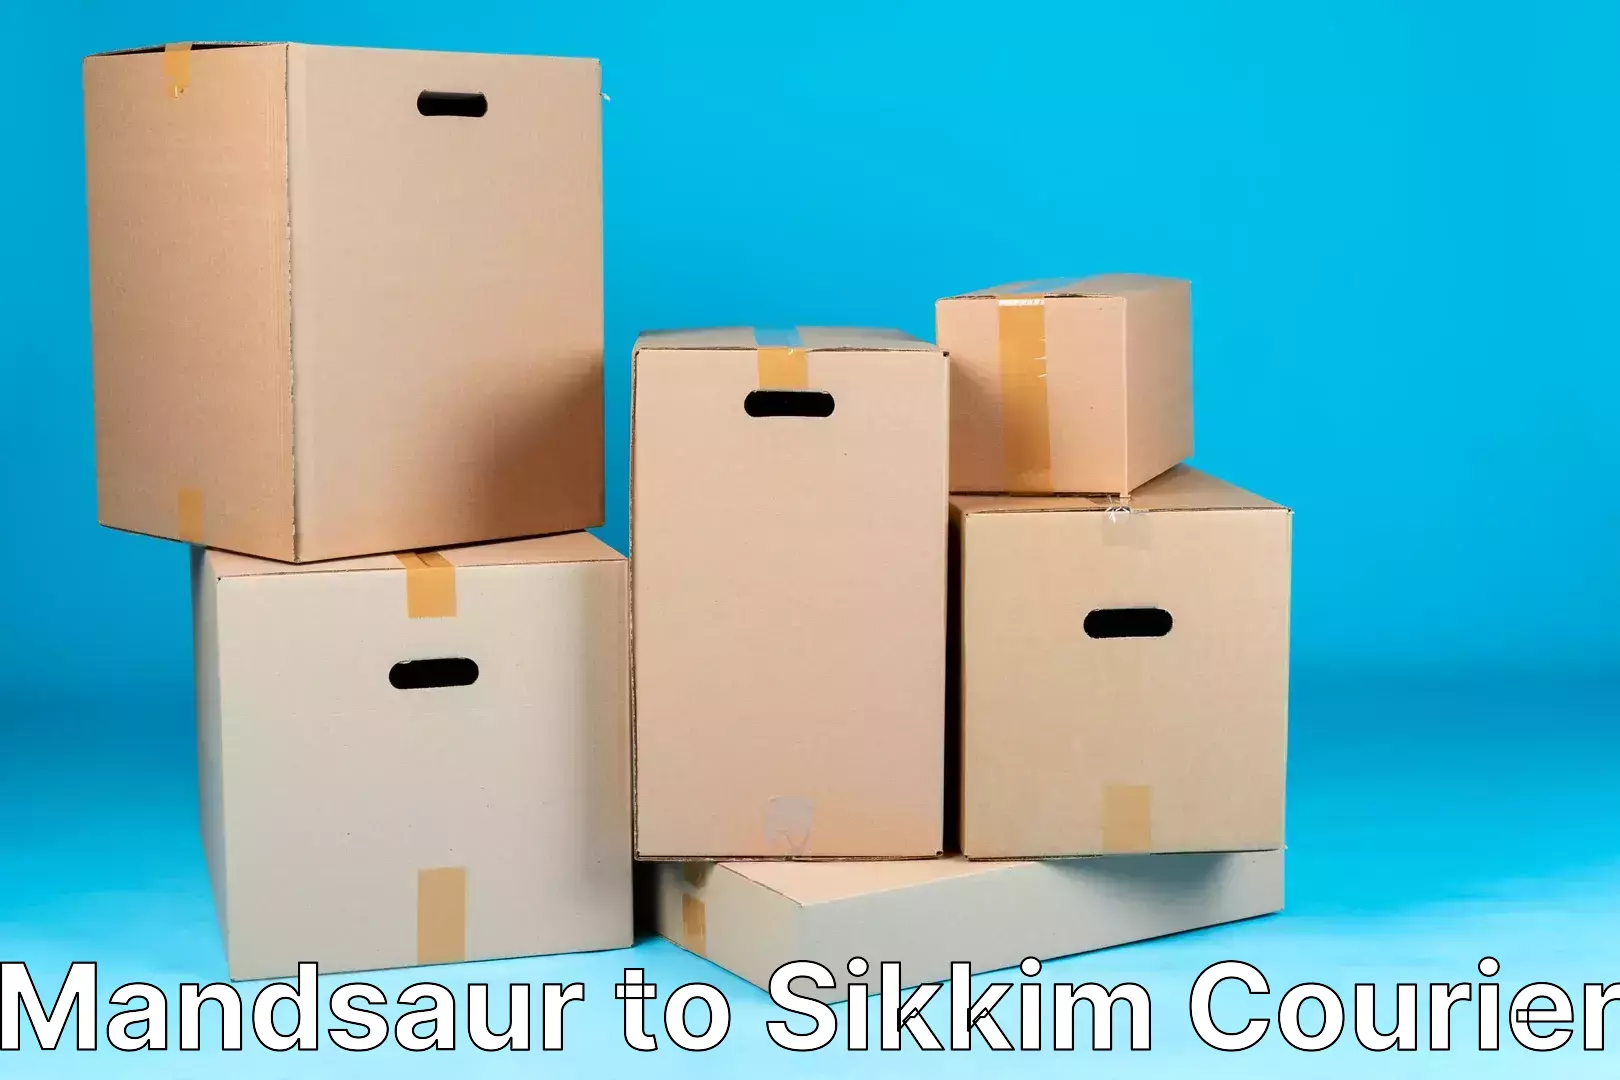 Global freight services Mandsaur to Sikkim